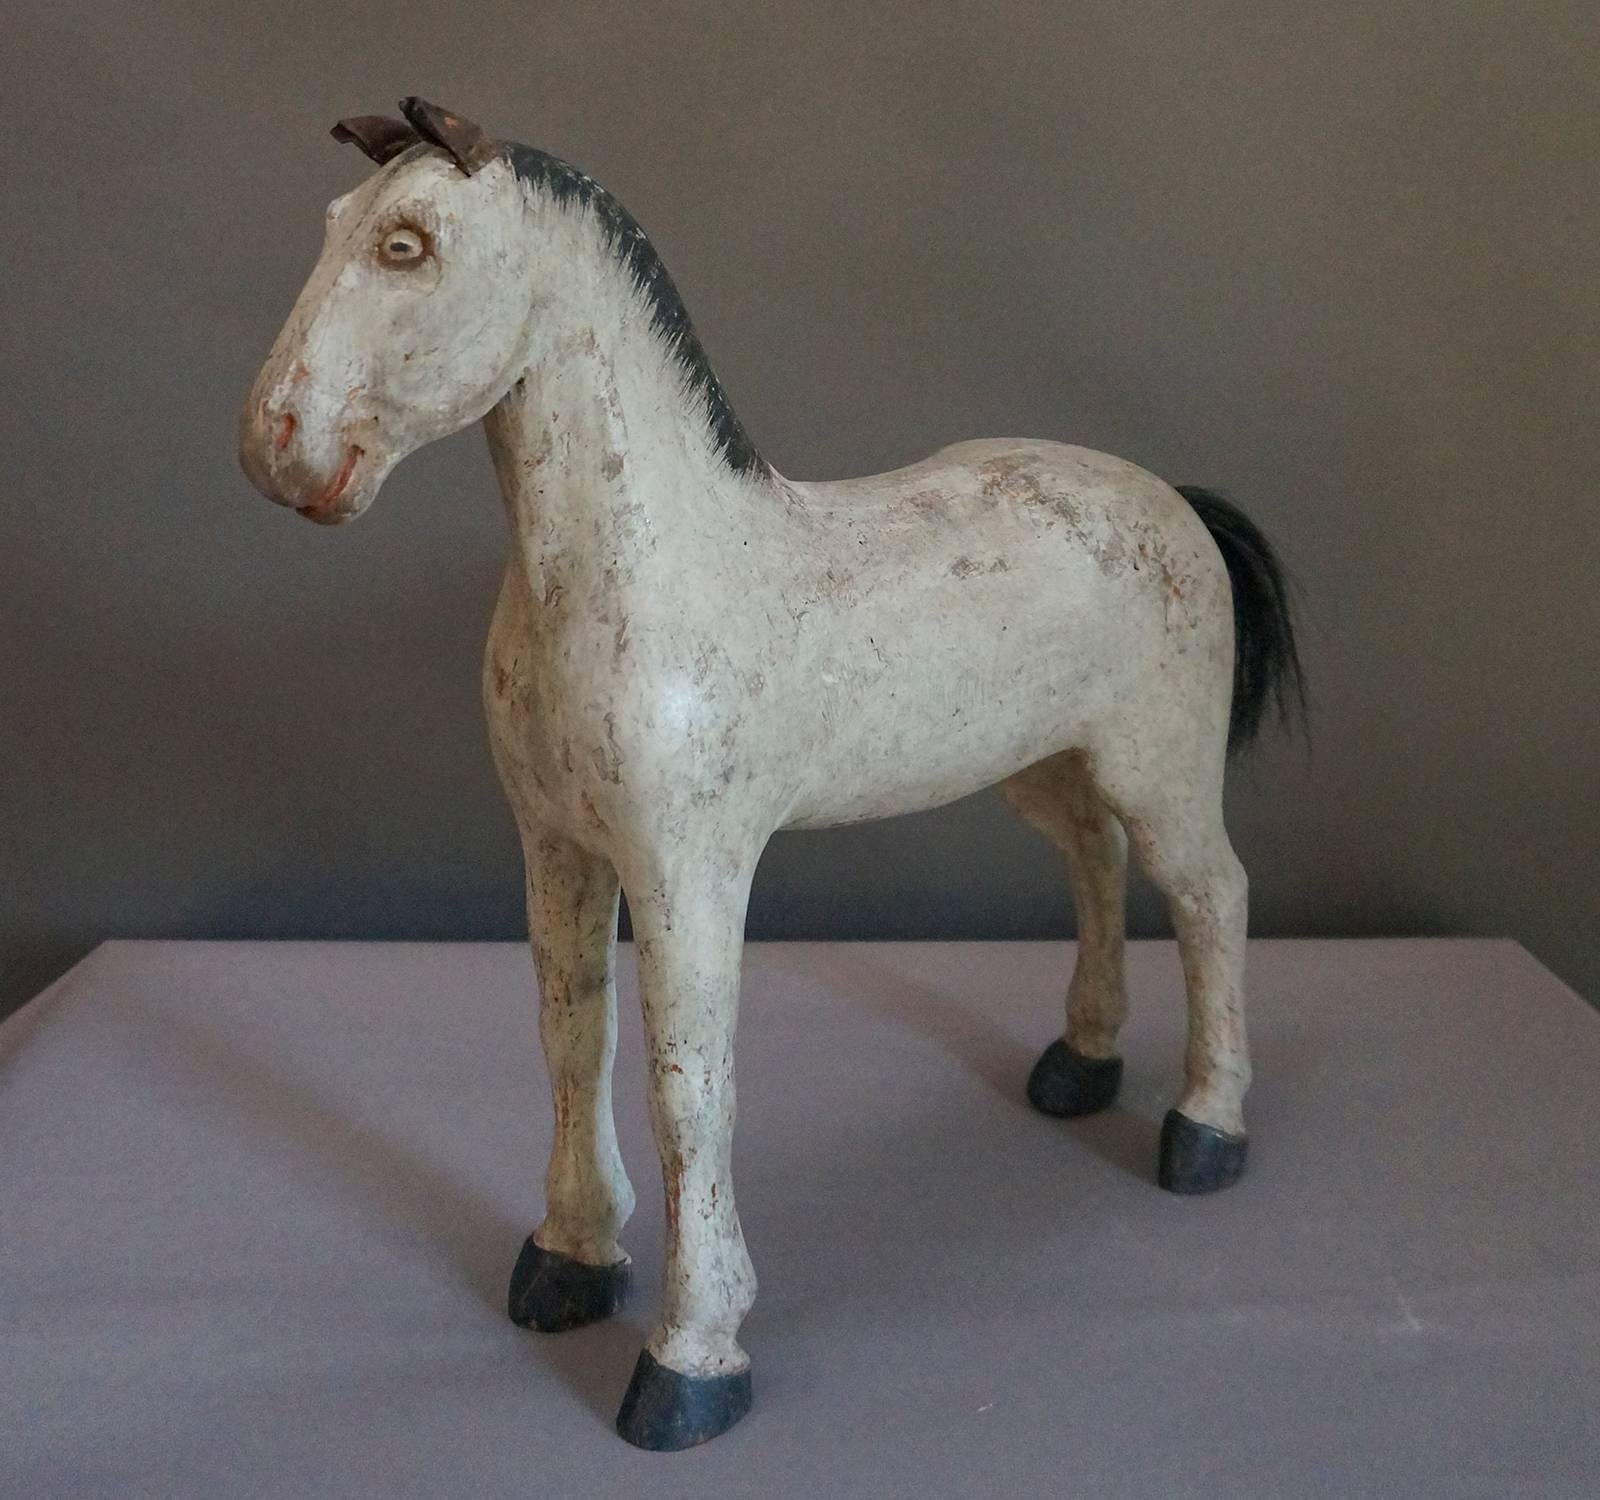 Sweden’s first toy factory was opened in Gemla in 1866, and this sturdy horse was made shortly after that date, circa 1870. He has a friendly, alert expression with perked leather ears and painted eyes. The mane is painted, but his tail is real